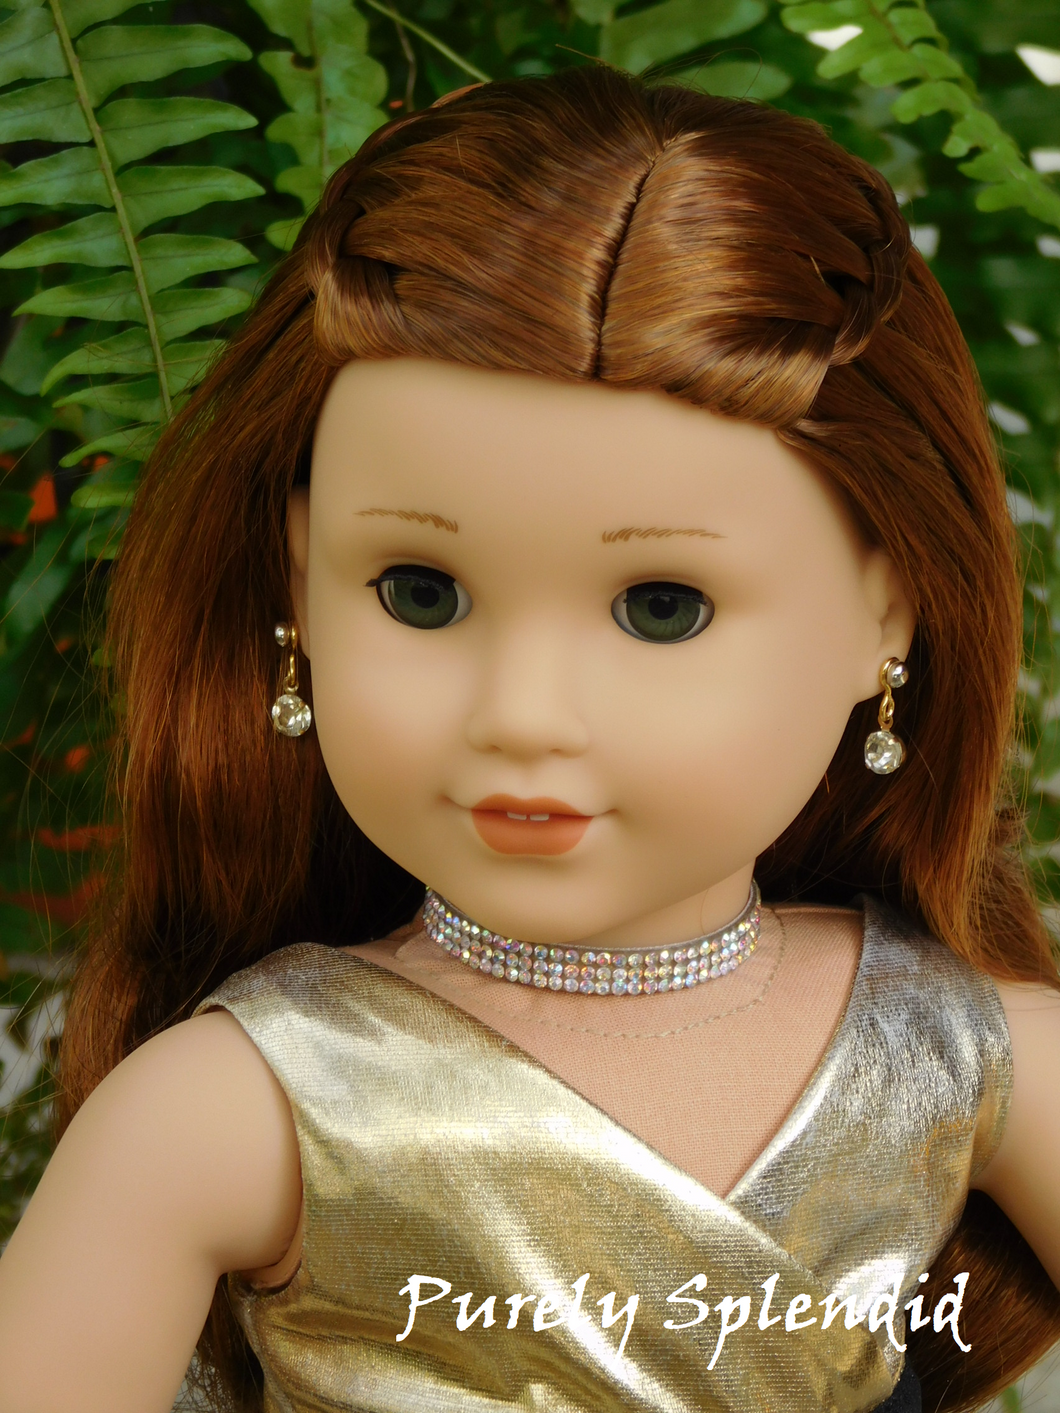 18 inch doll shown wearing a Sparkling Rhinestone Choker Necklace